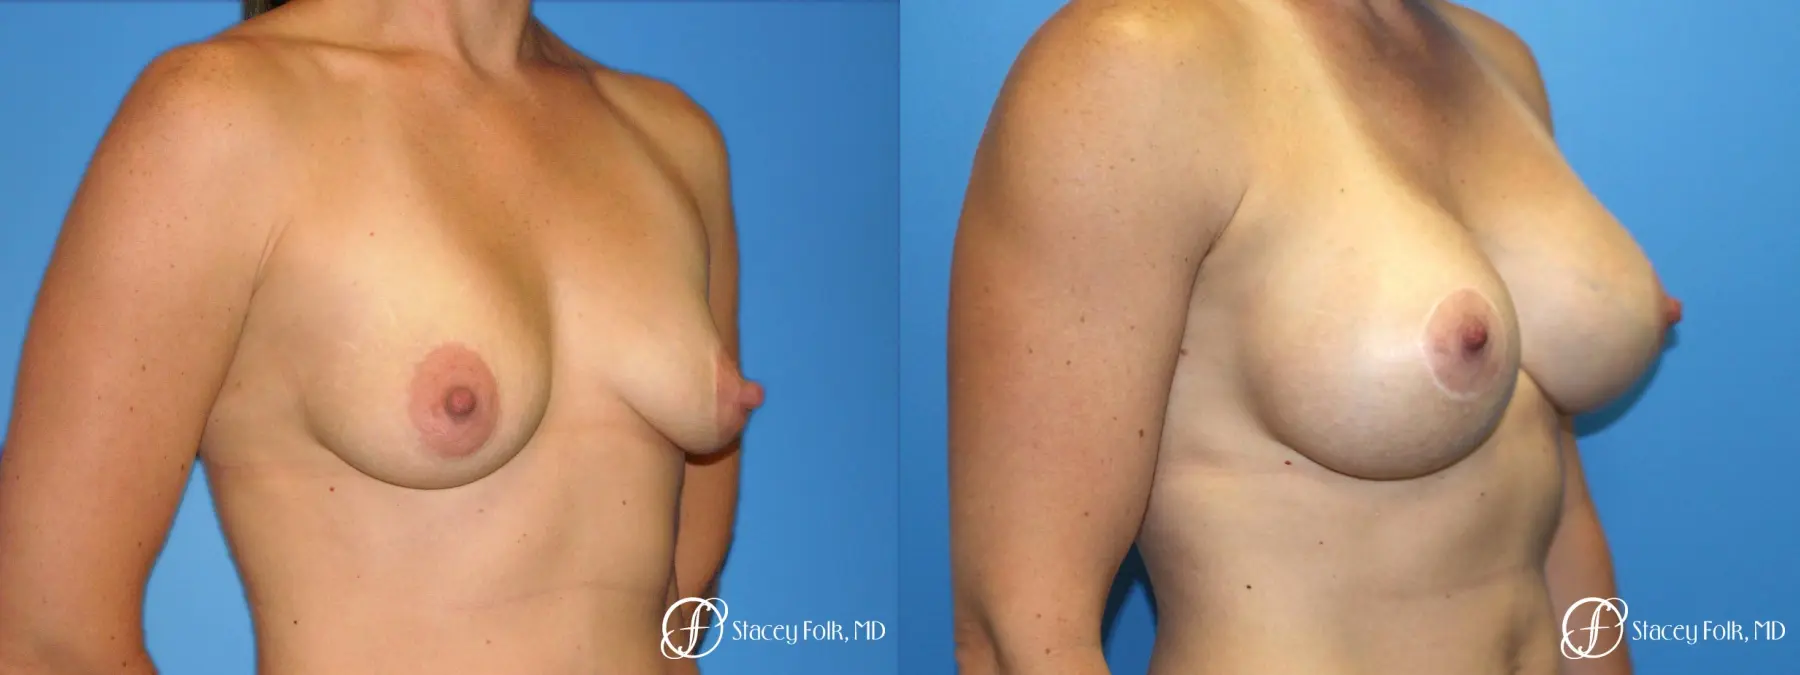 Denver Breast Augmentation with a Breast Lift - Mastopexy 8361 - Before and After 2